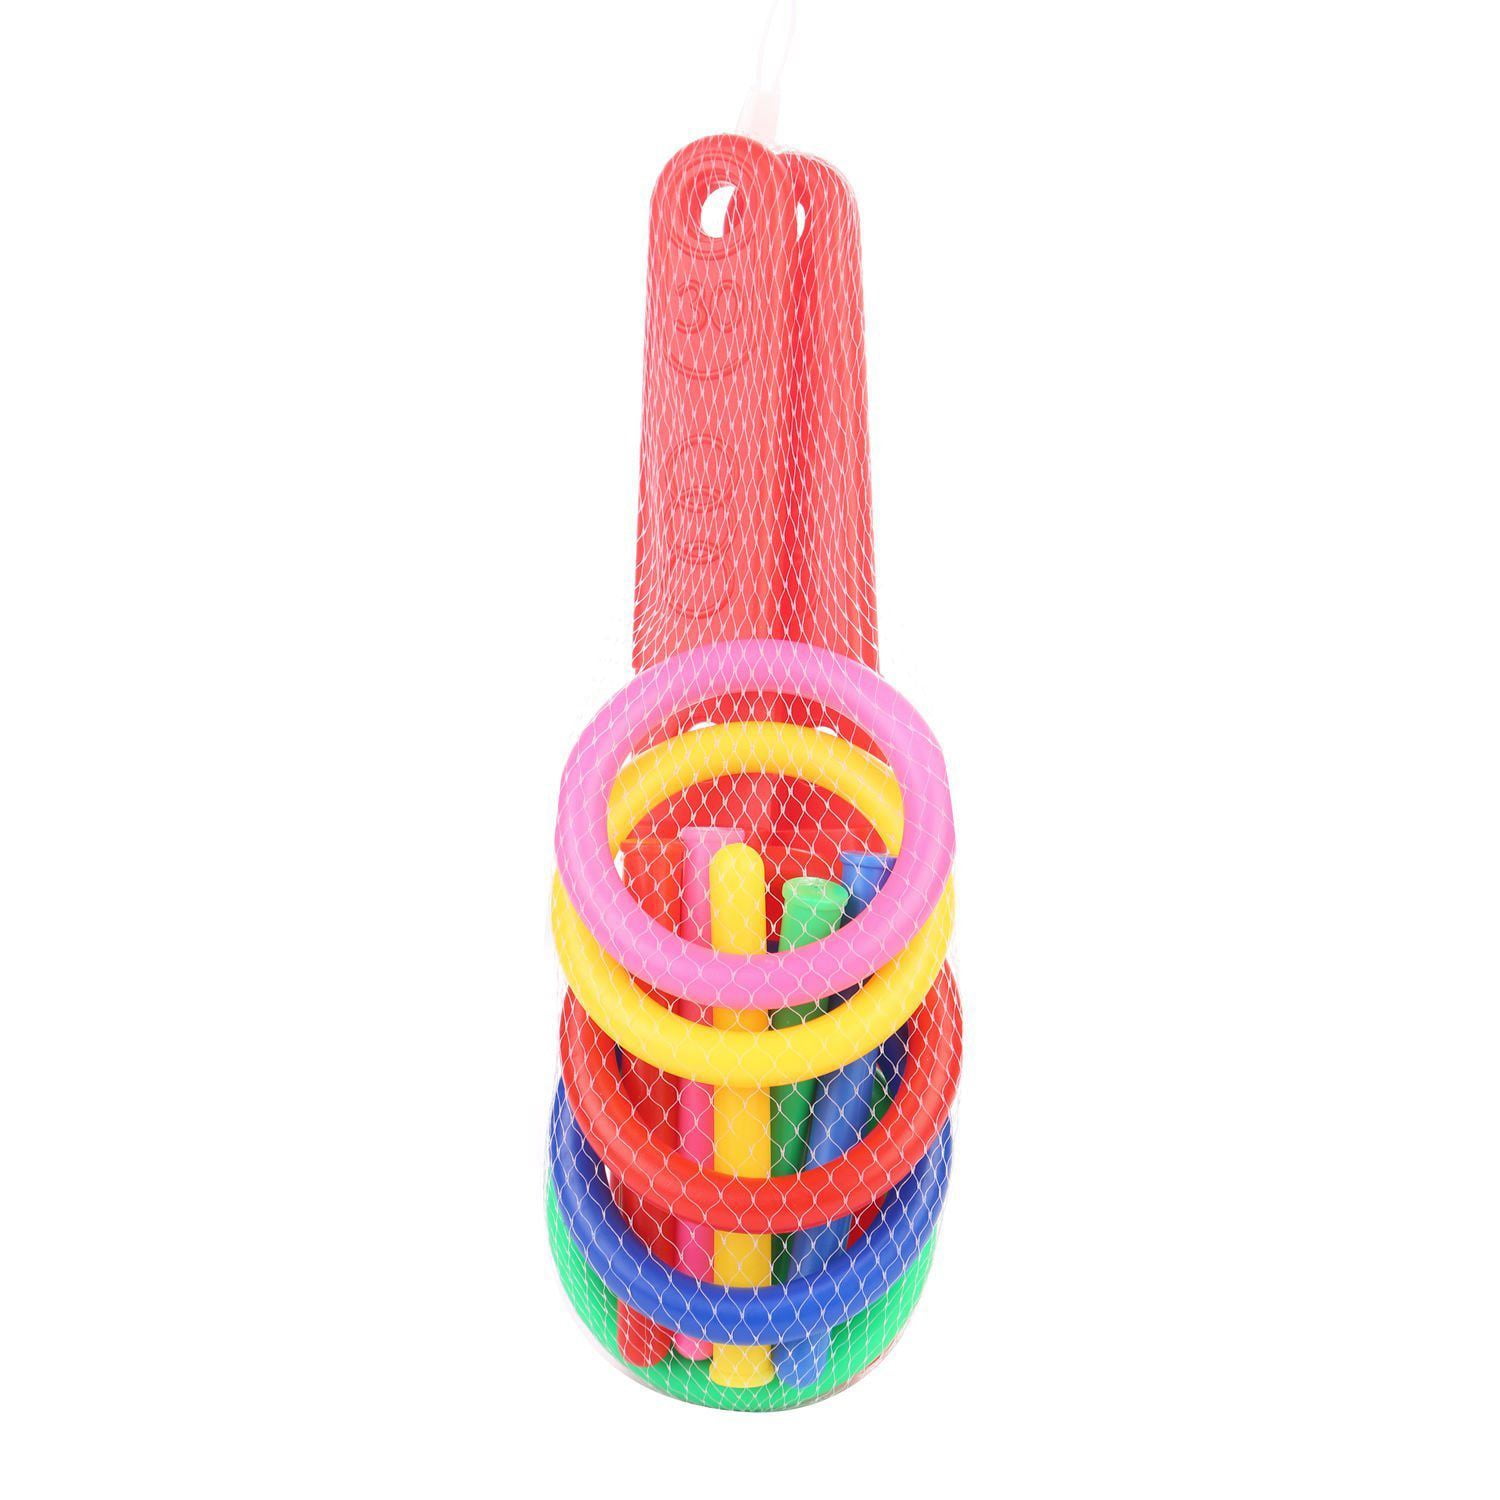 CUHAWUDBA Ring Toss Game Quoits Hoopla Set Quiots Pegs Rope Target Kids Garden Party 